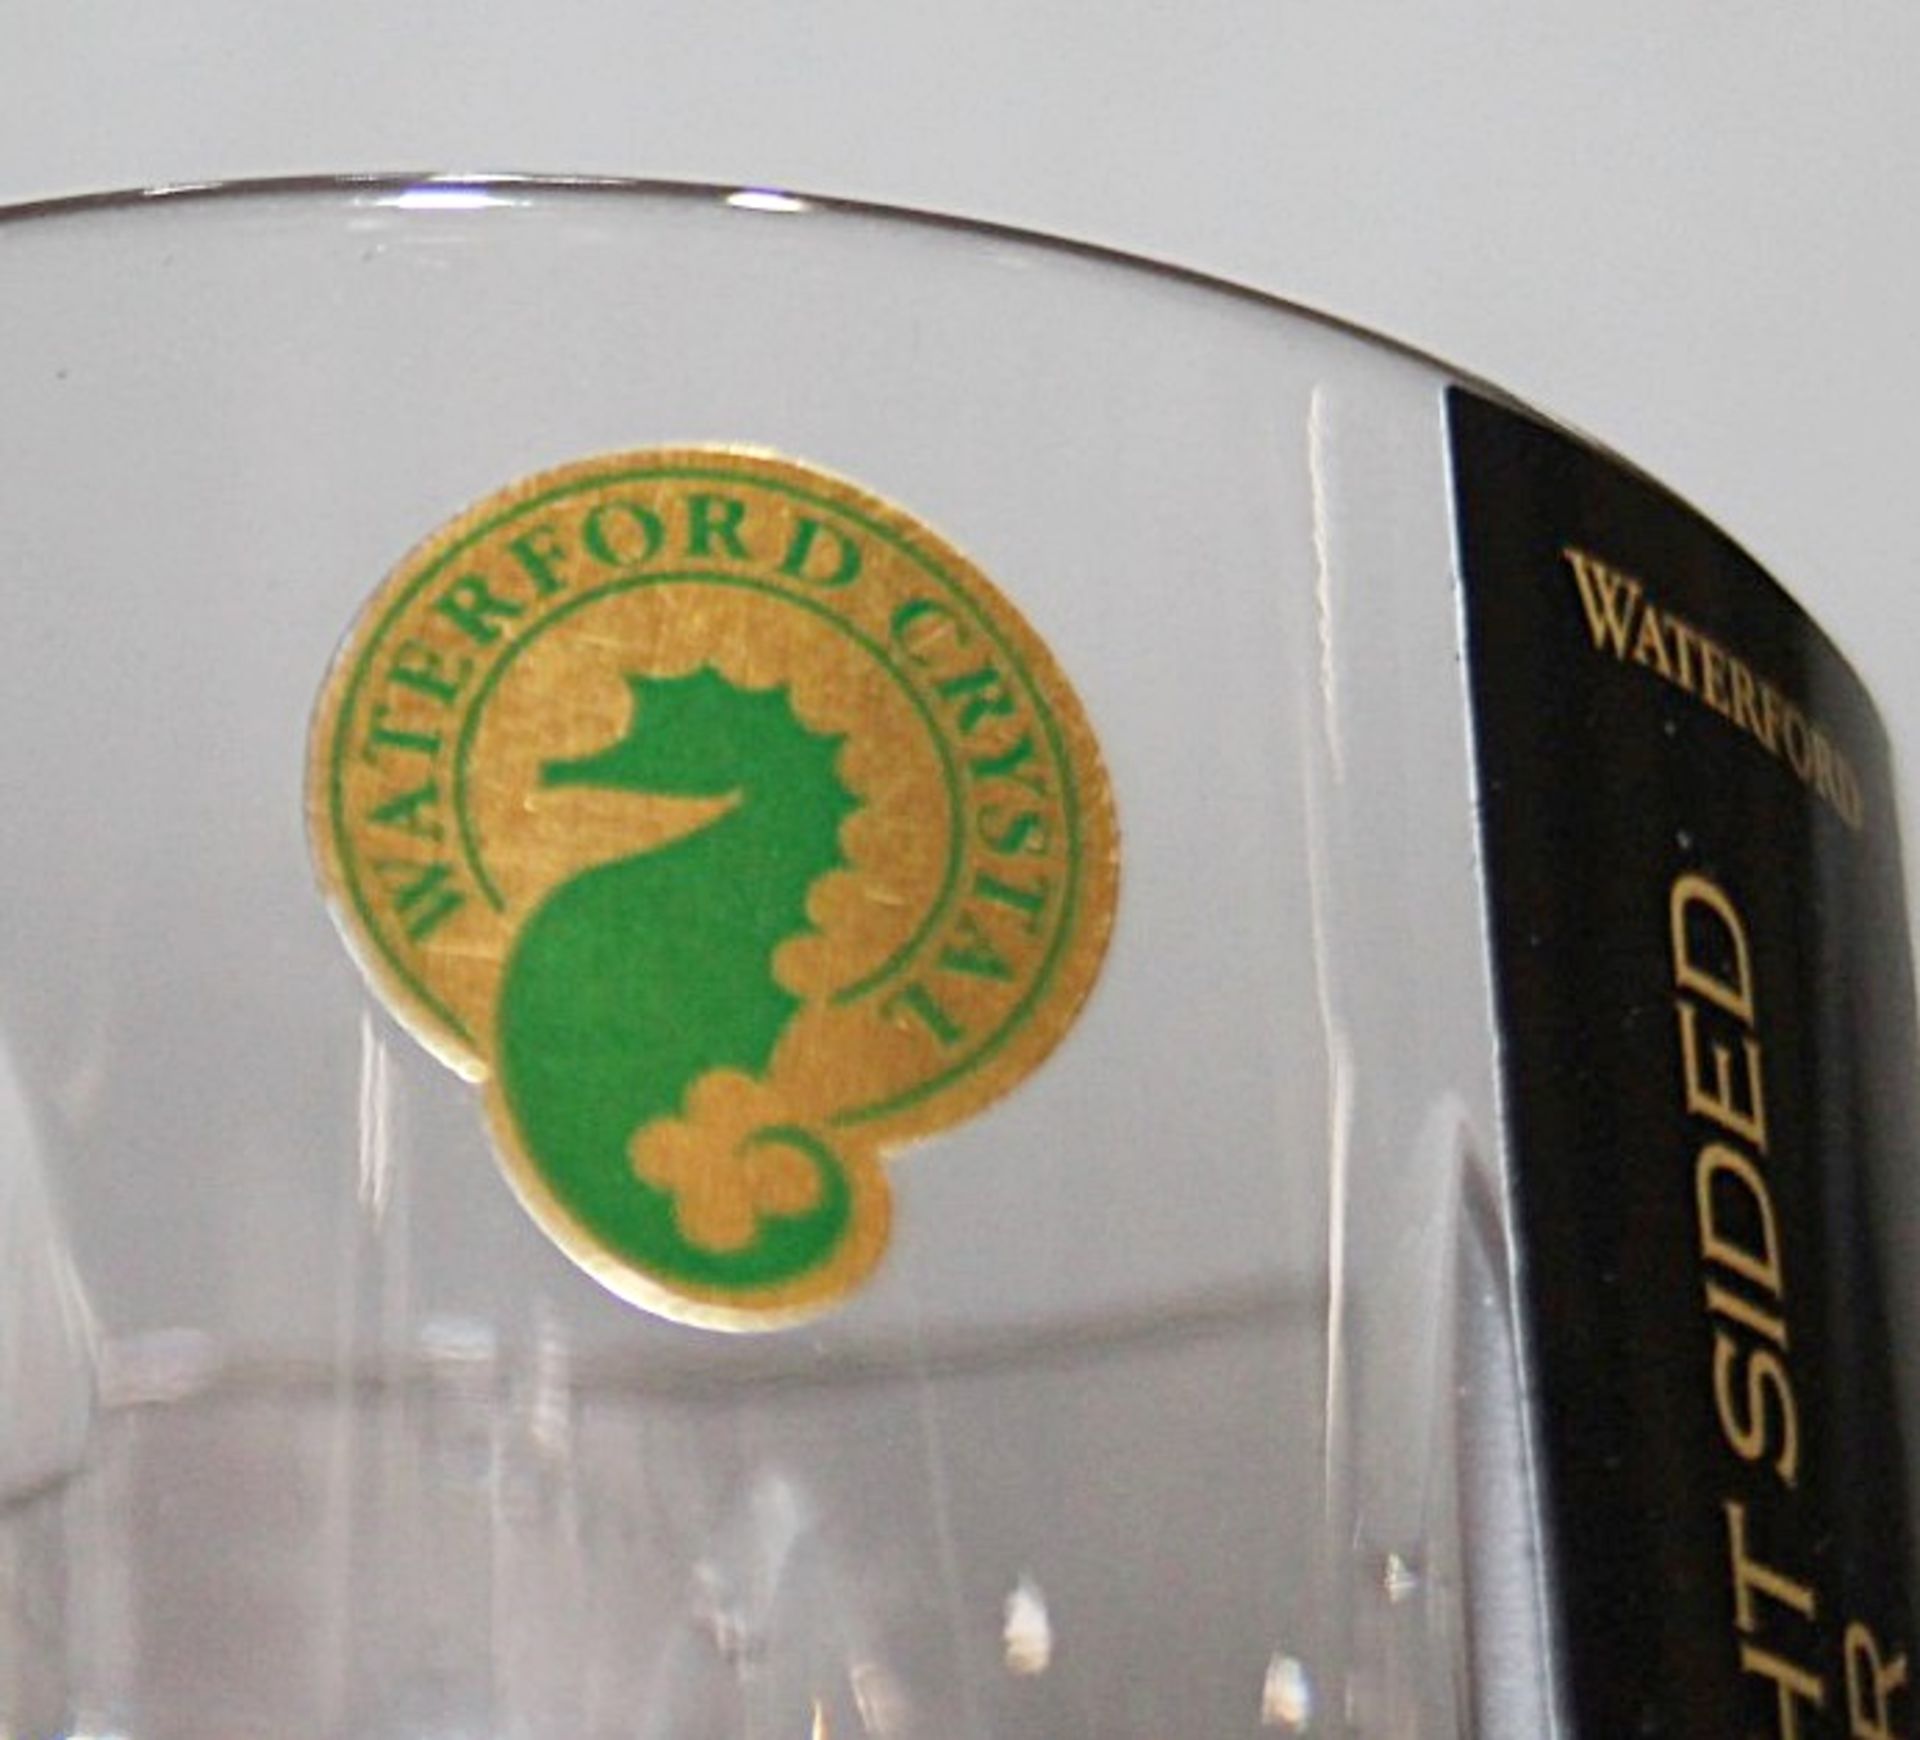 1 x WATERFORD CRYSTAL 'Lismore' Old Fashioned Tumbler - Original Price £55.00 - Unused Boxed Stock - Image 3 of 6